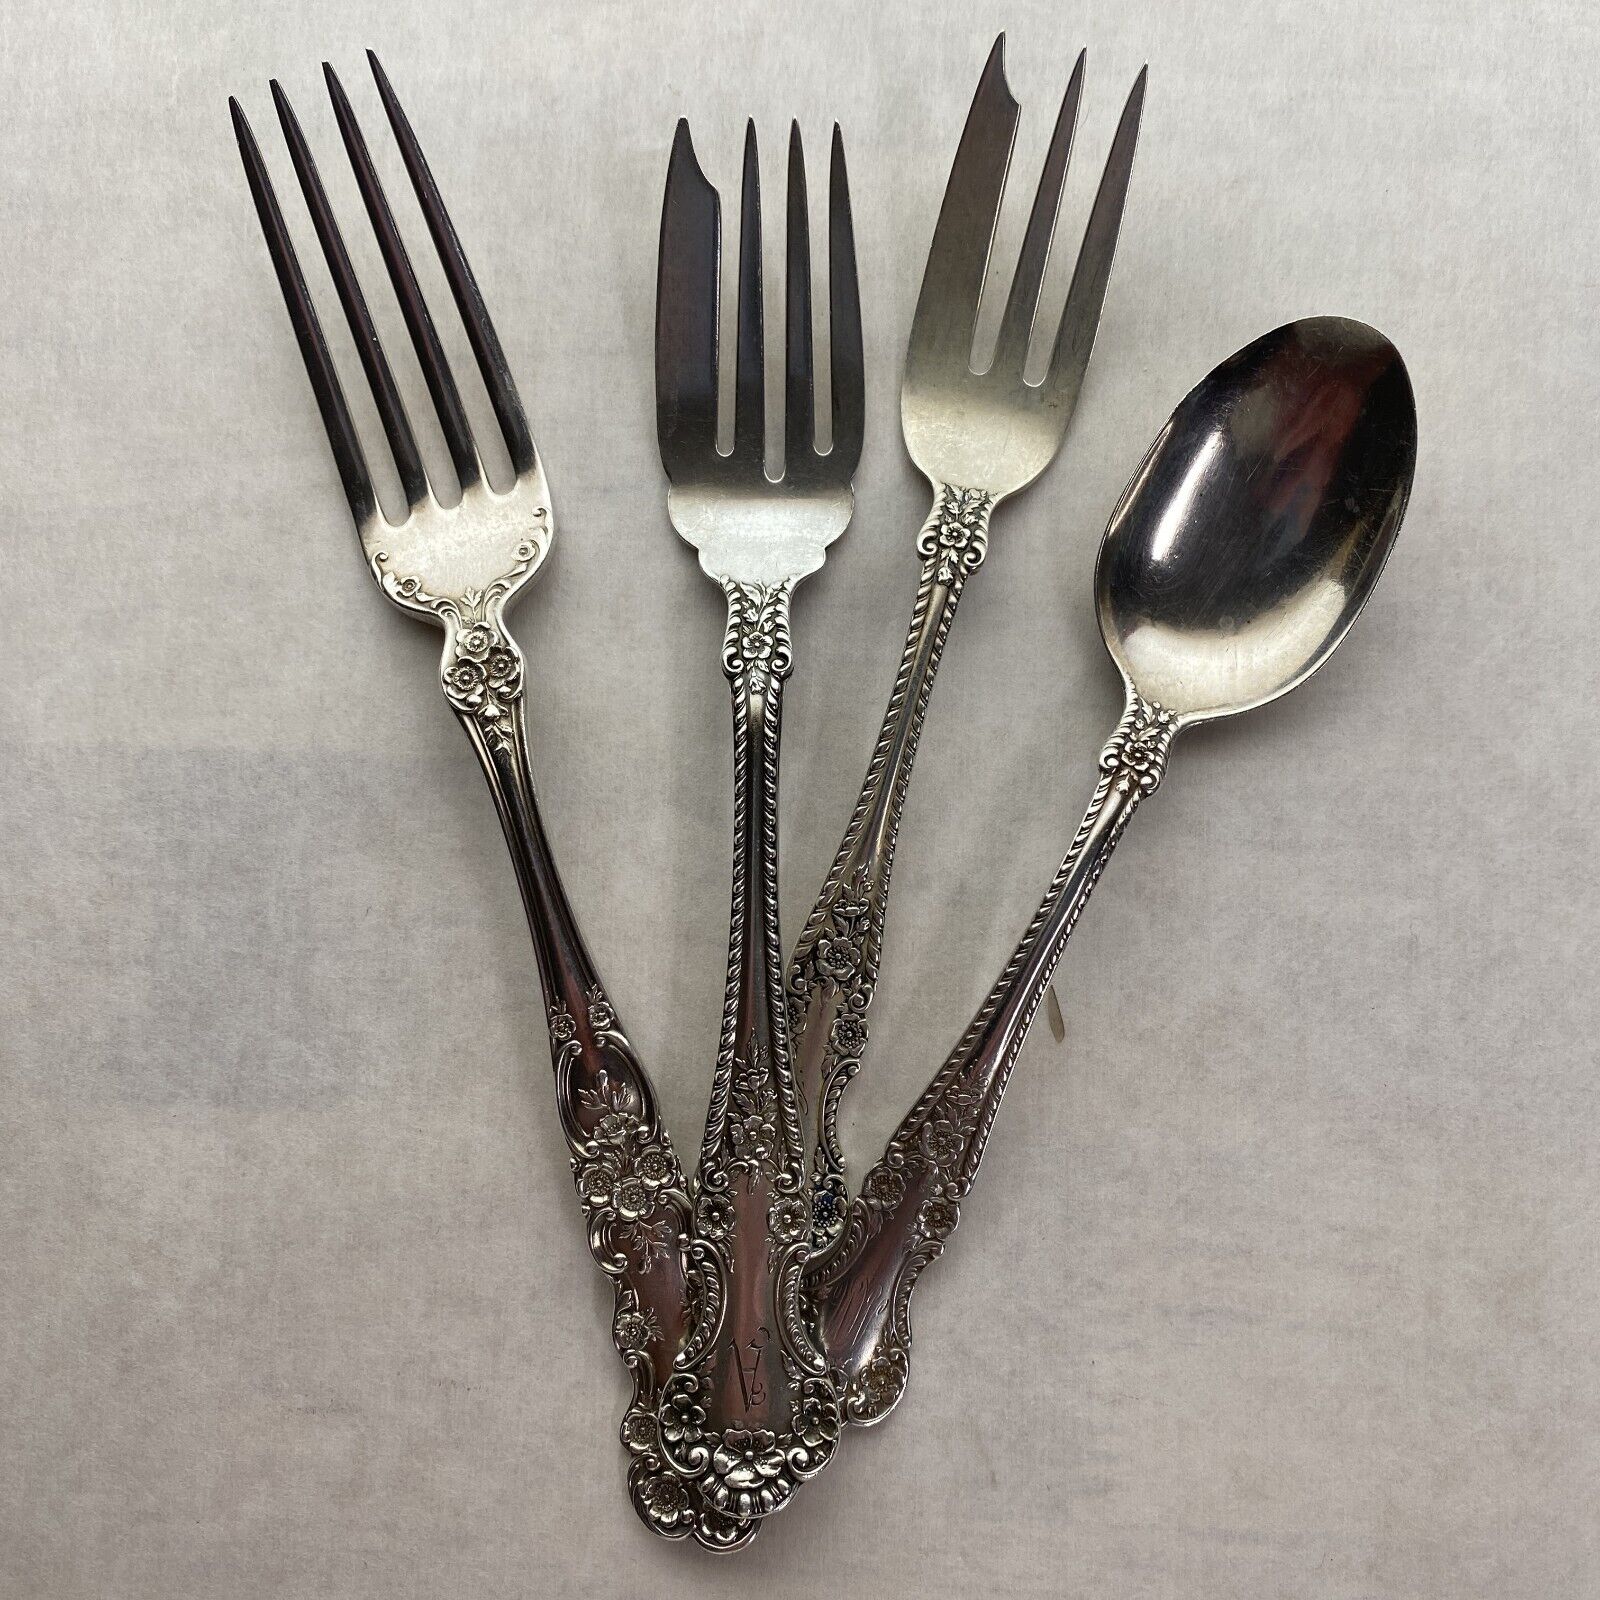 Gorham Sterling Silver Flatware Mixed Lot Use or Scrap Weight 121 grams (SS2481)